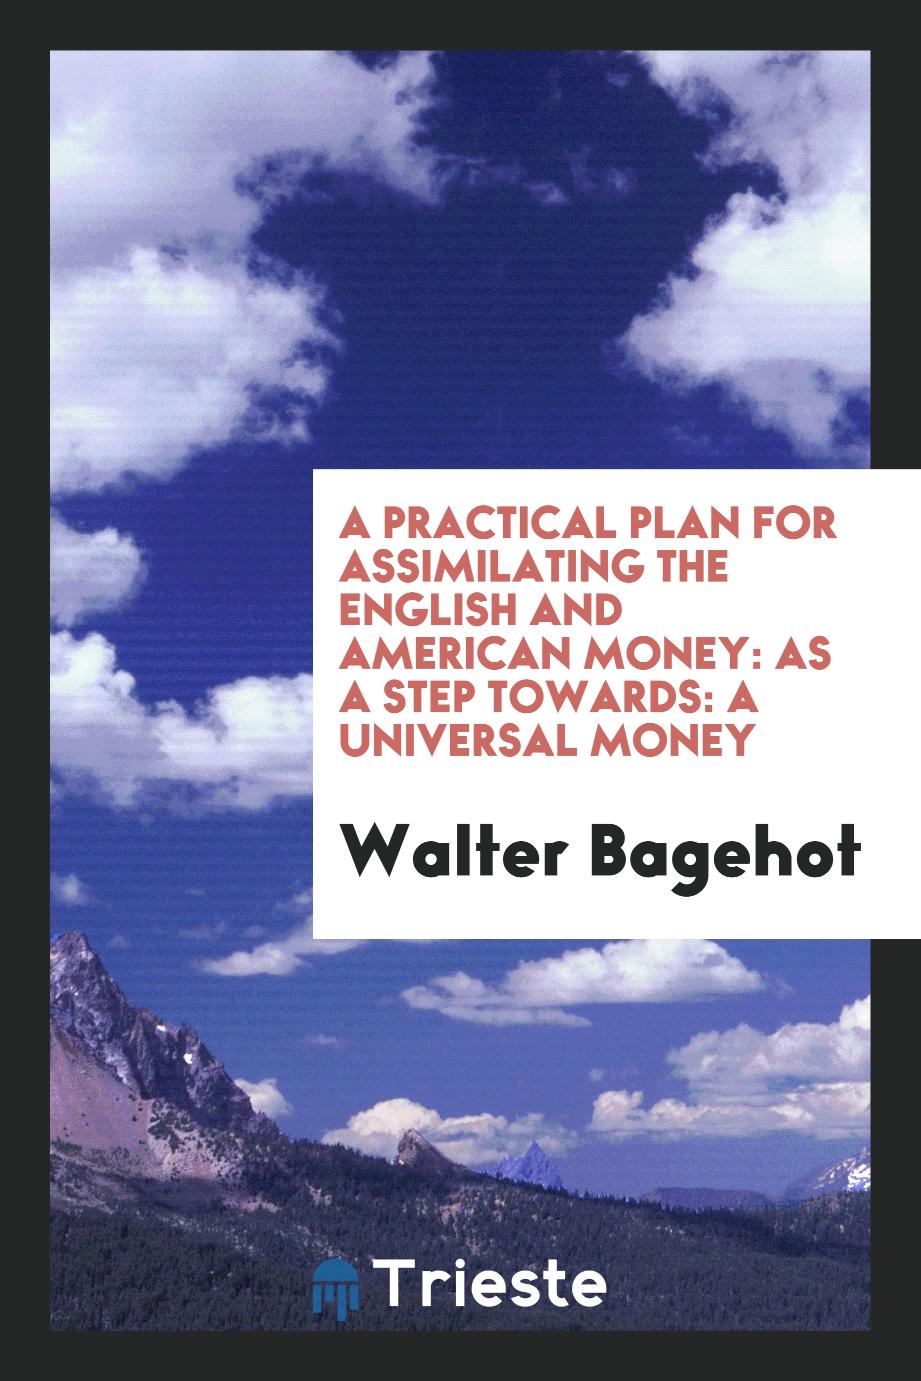 A Practical Plan for Assimilating the English and American Money: As a Step Towards: A Universal Money